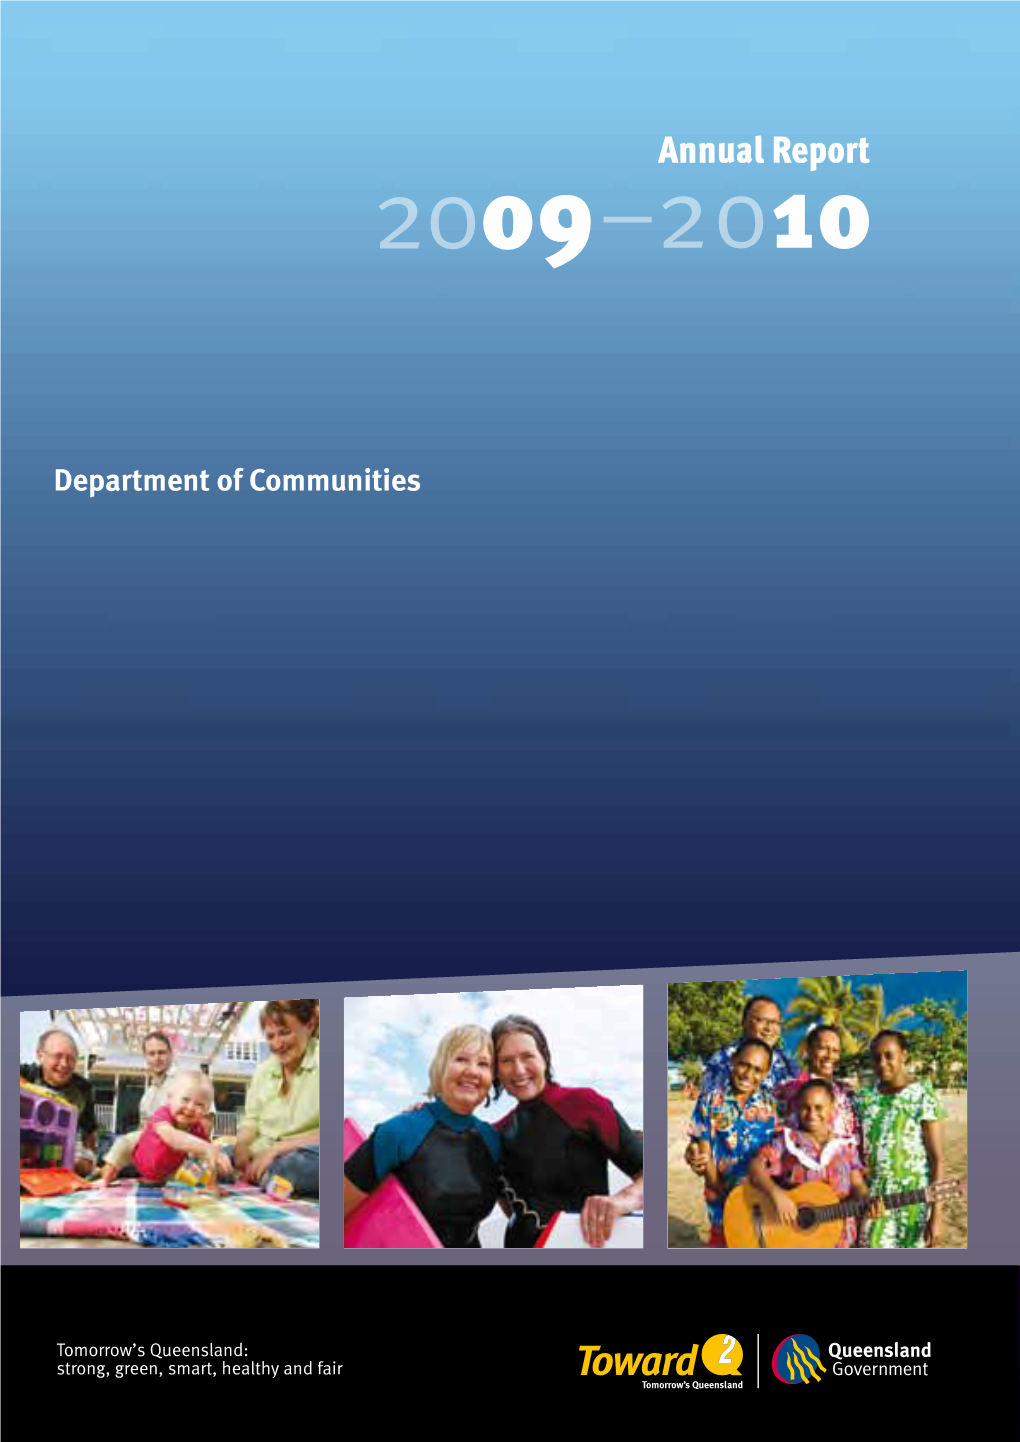 Annual Report 2009-10 for the Department of Communities